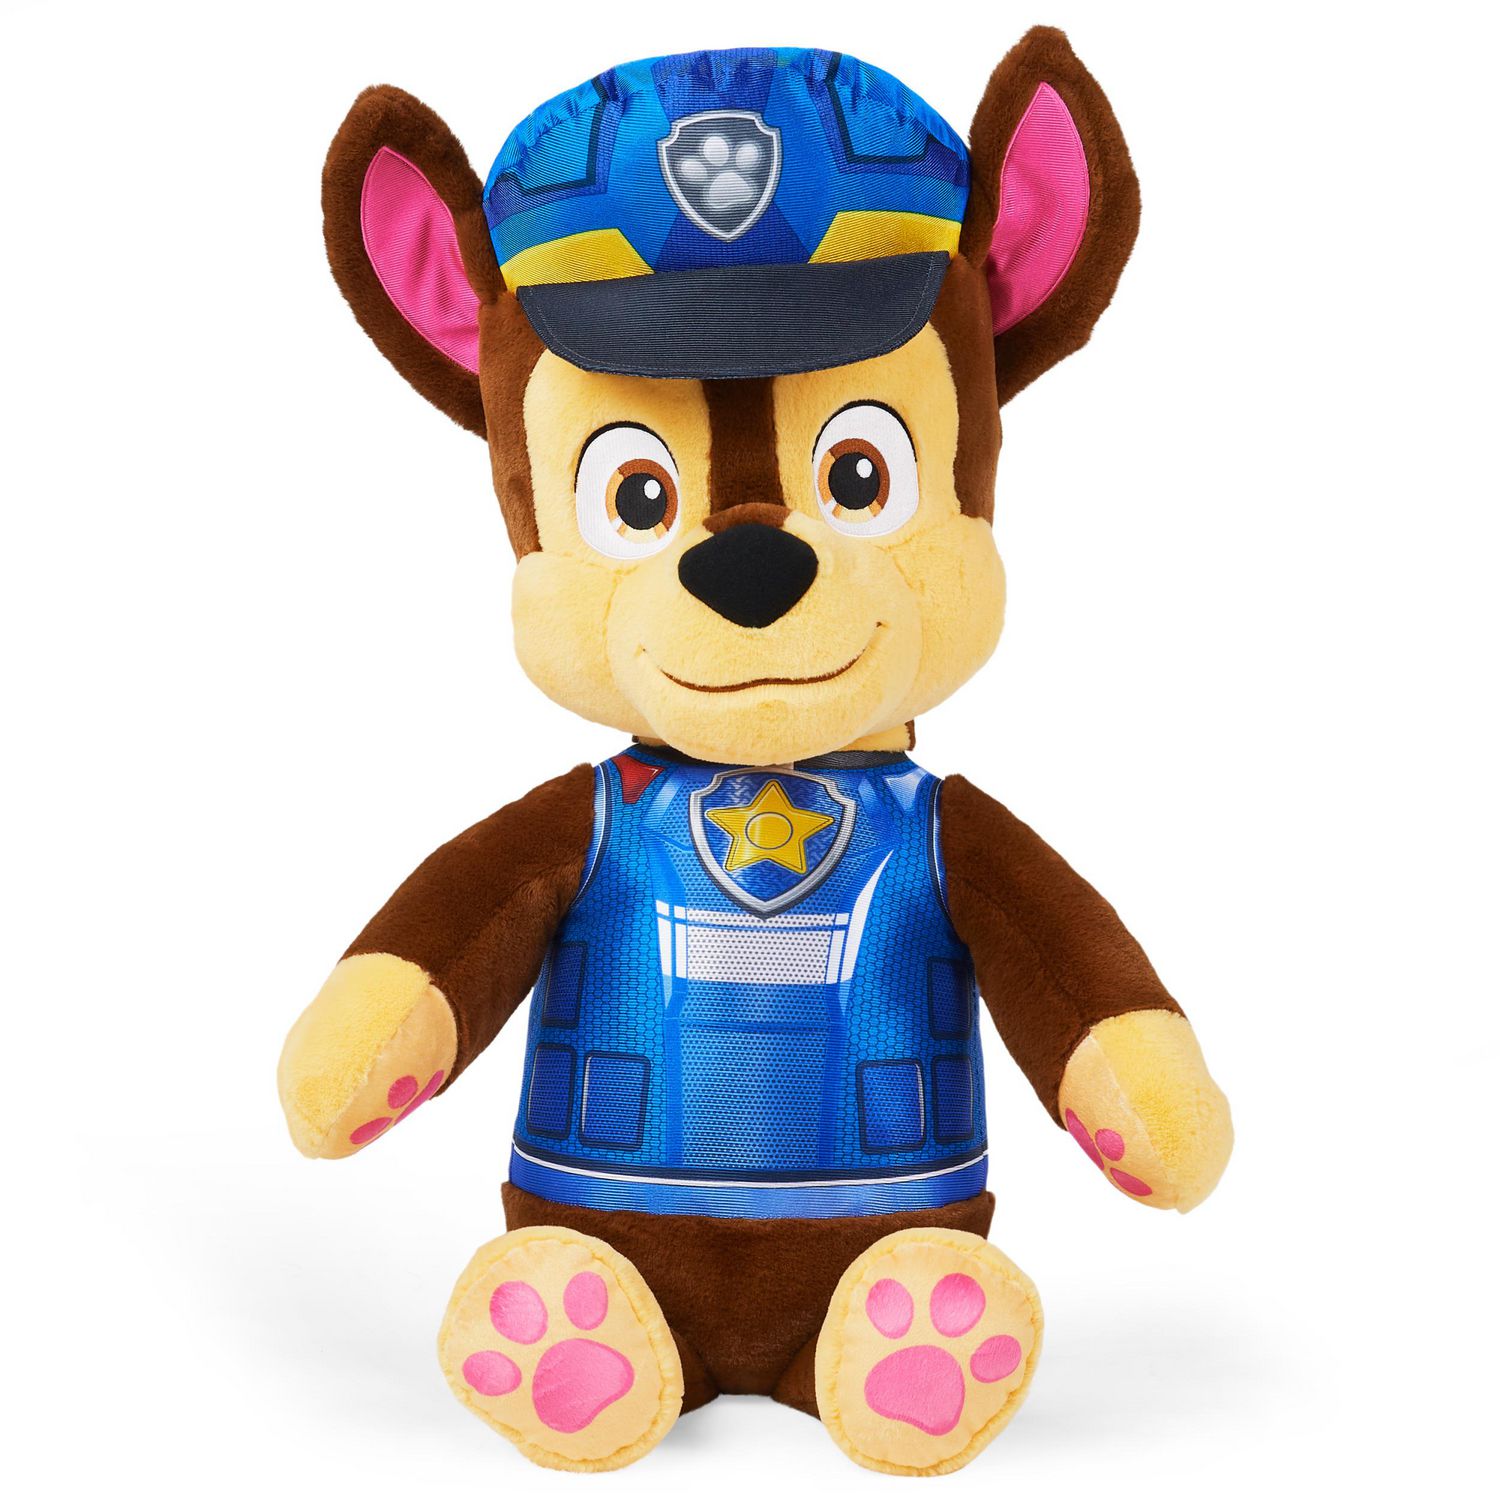 PAW Patrol, Movie Chase Jumbo Stuffed Animal Plush Toy, 29-inch, Kids Toys  for Ages 3 and up | Walmart Canada